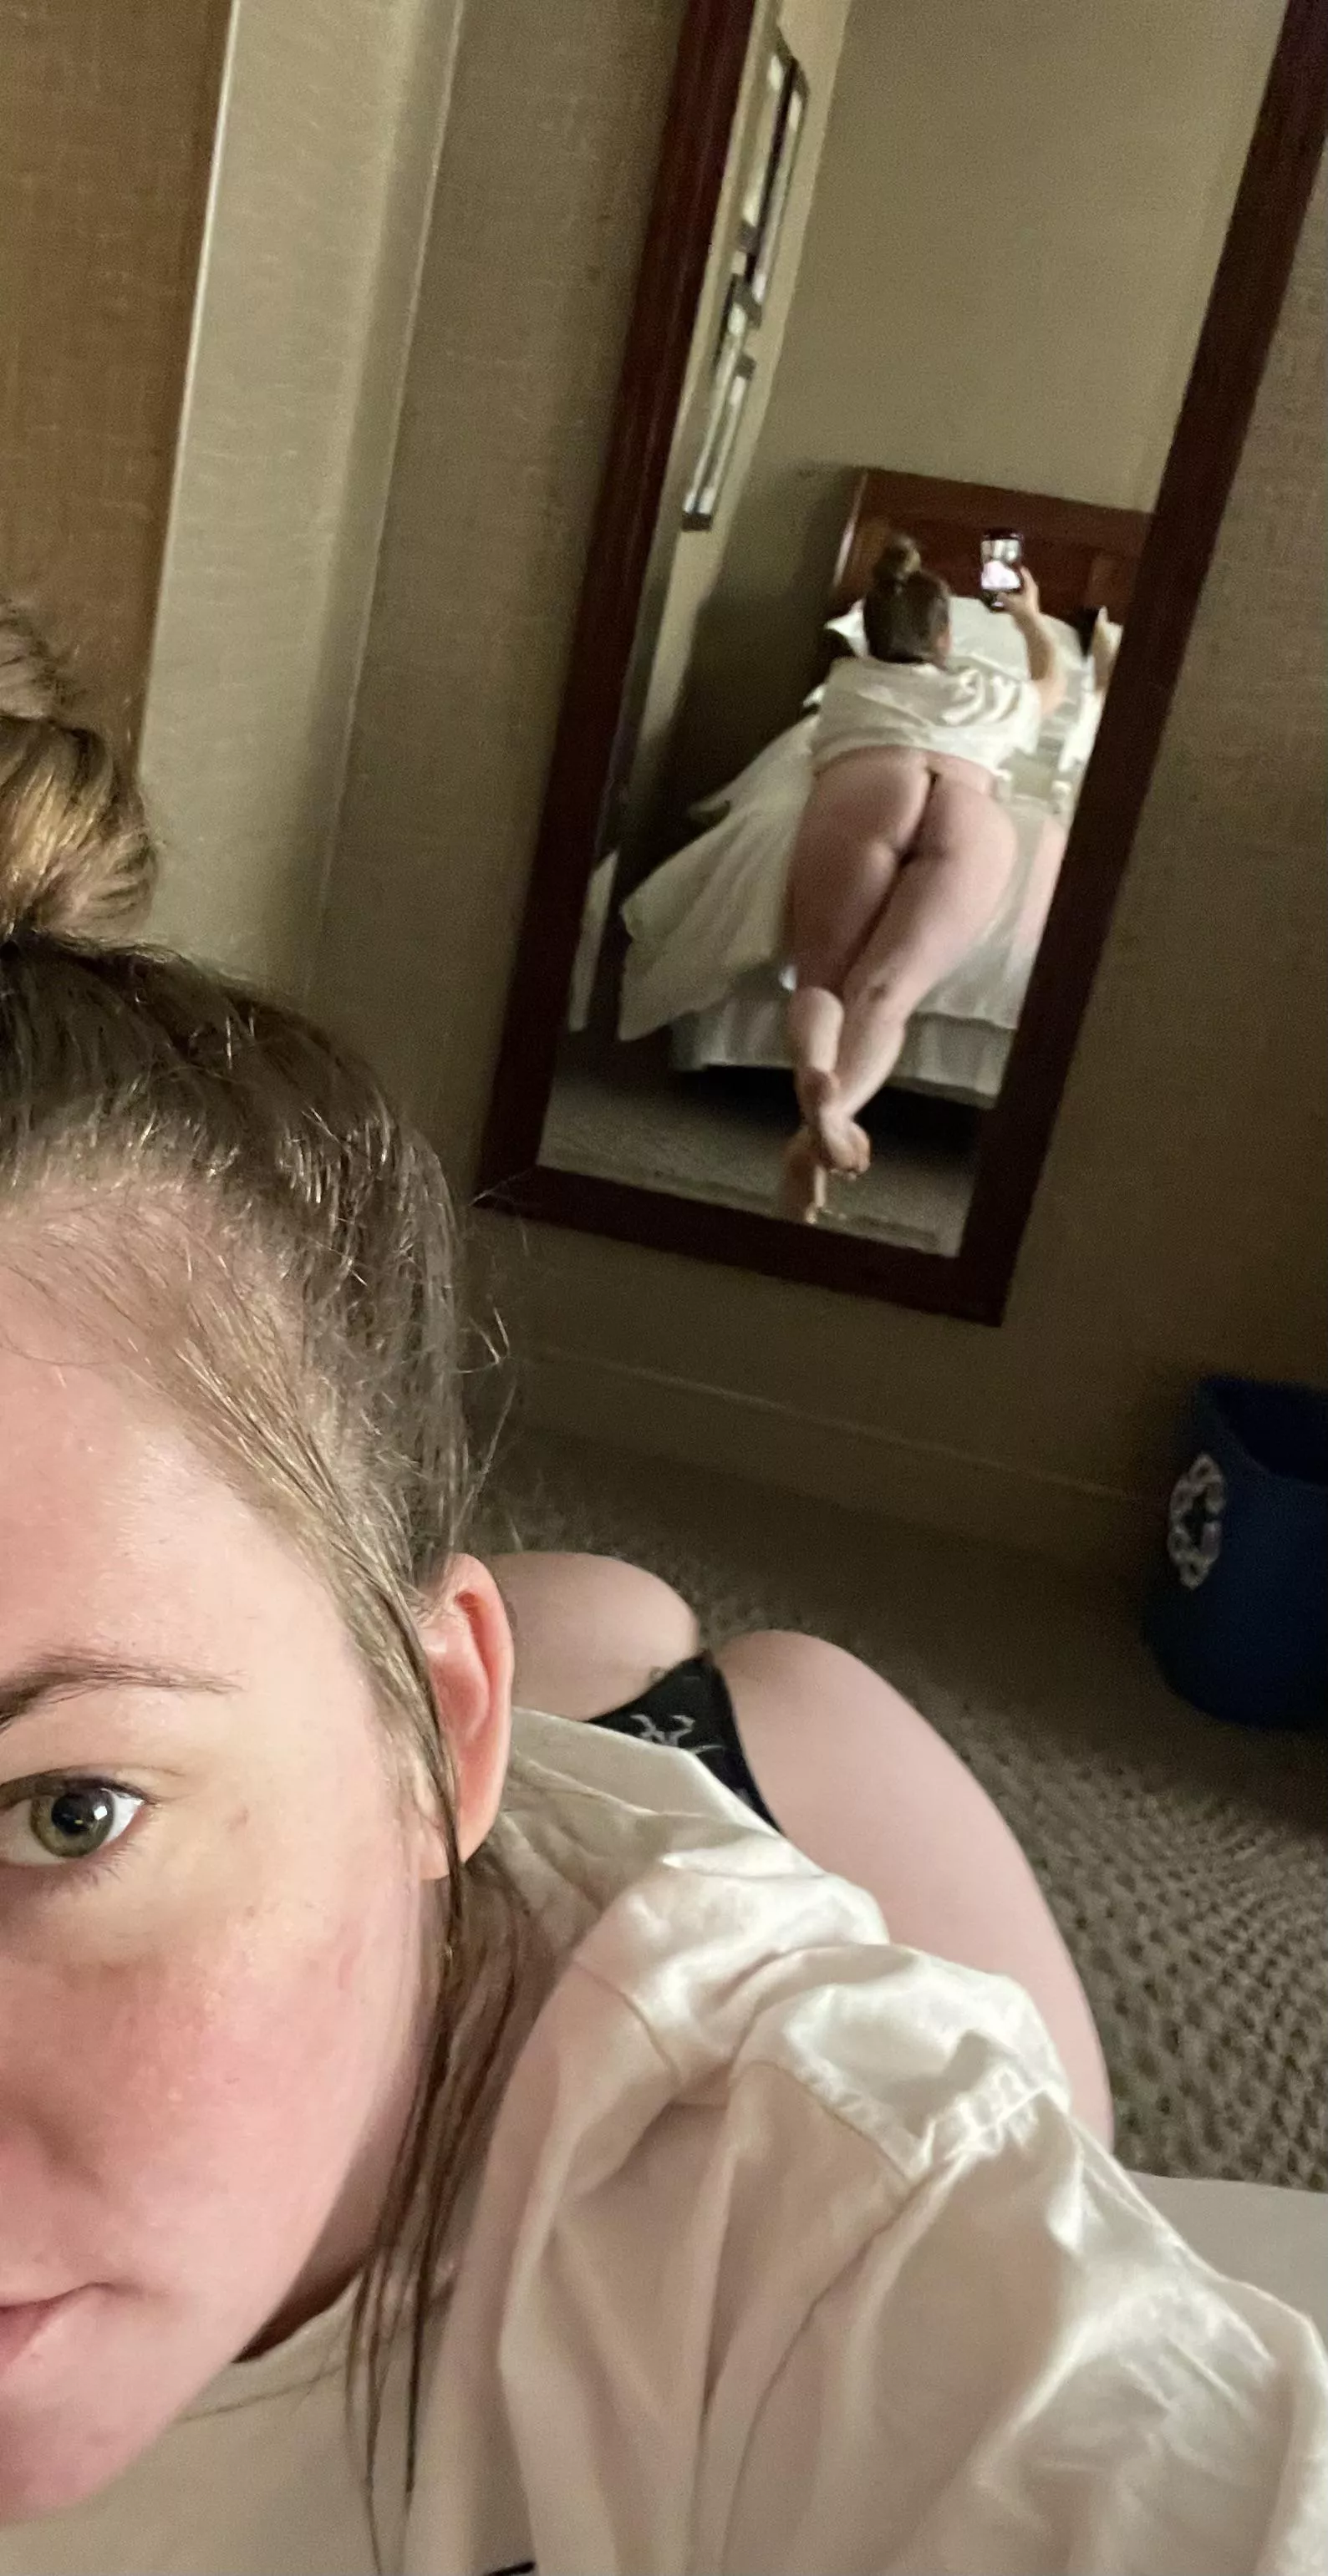 The Milf In The Mirror